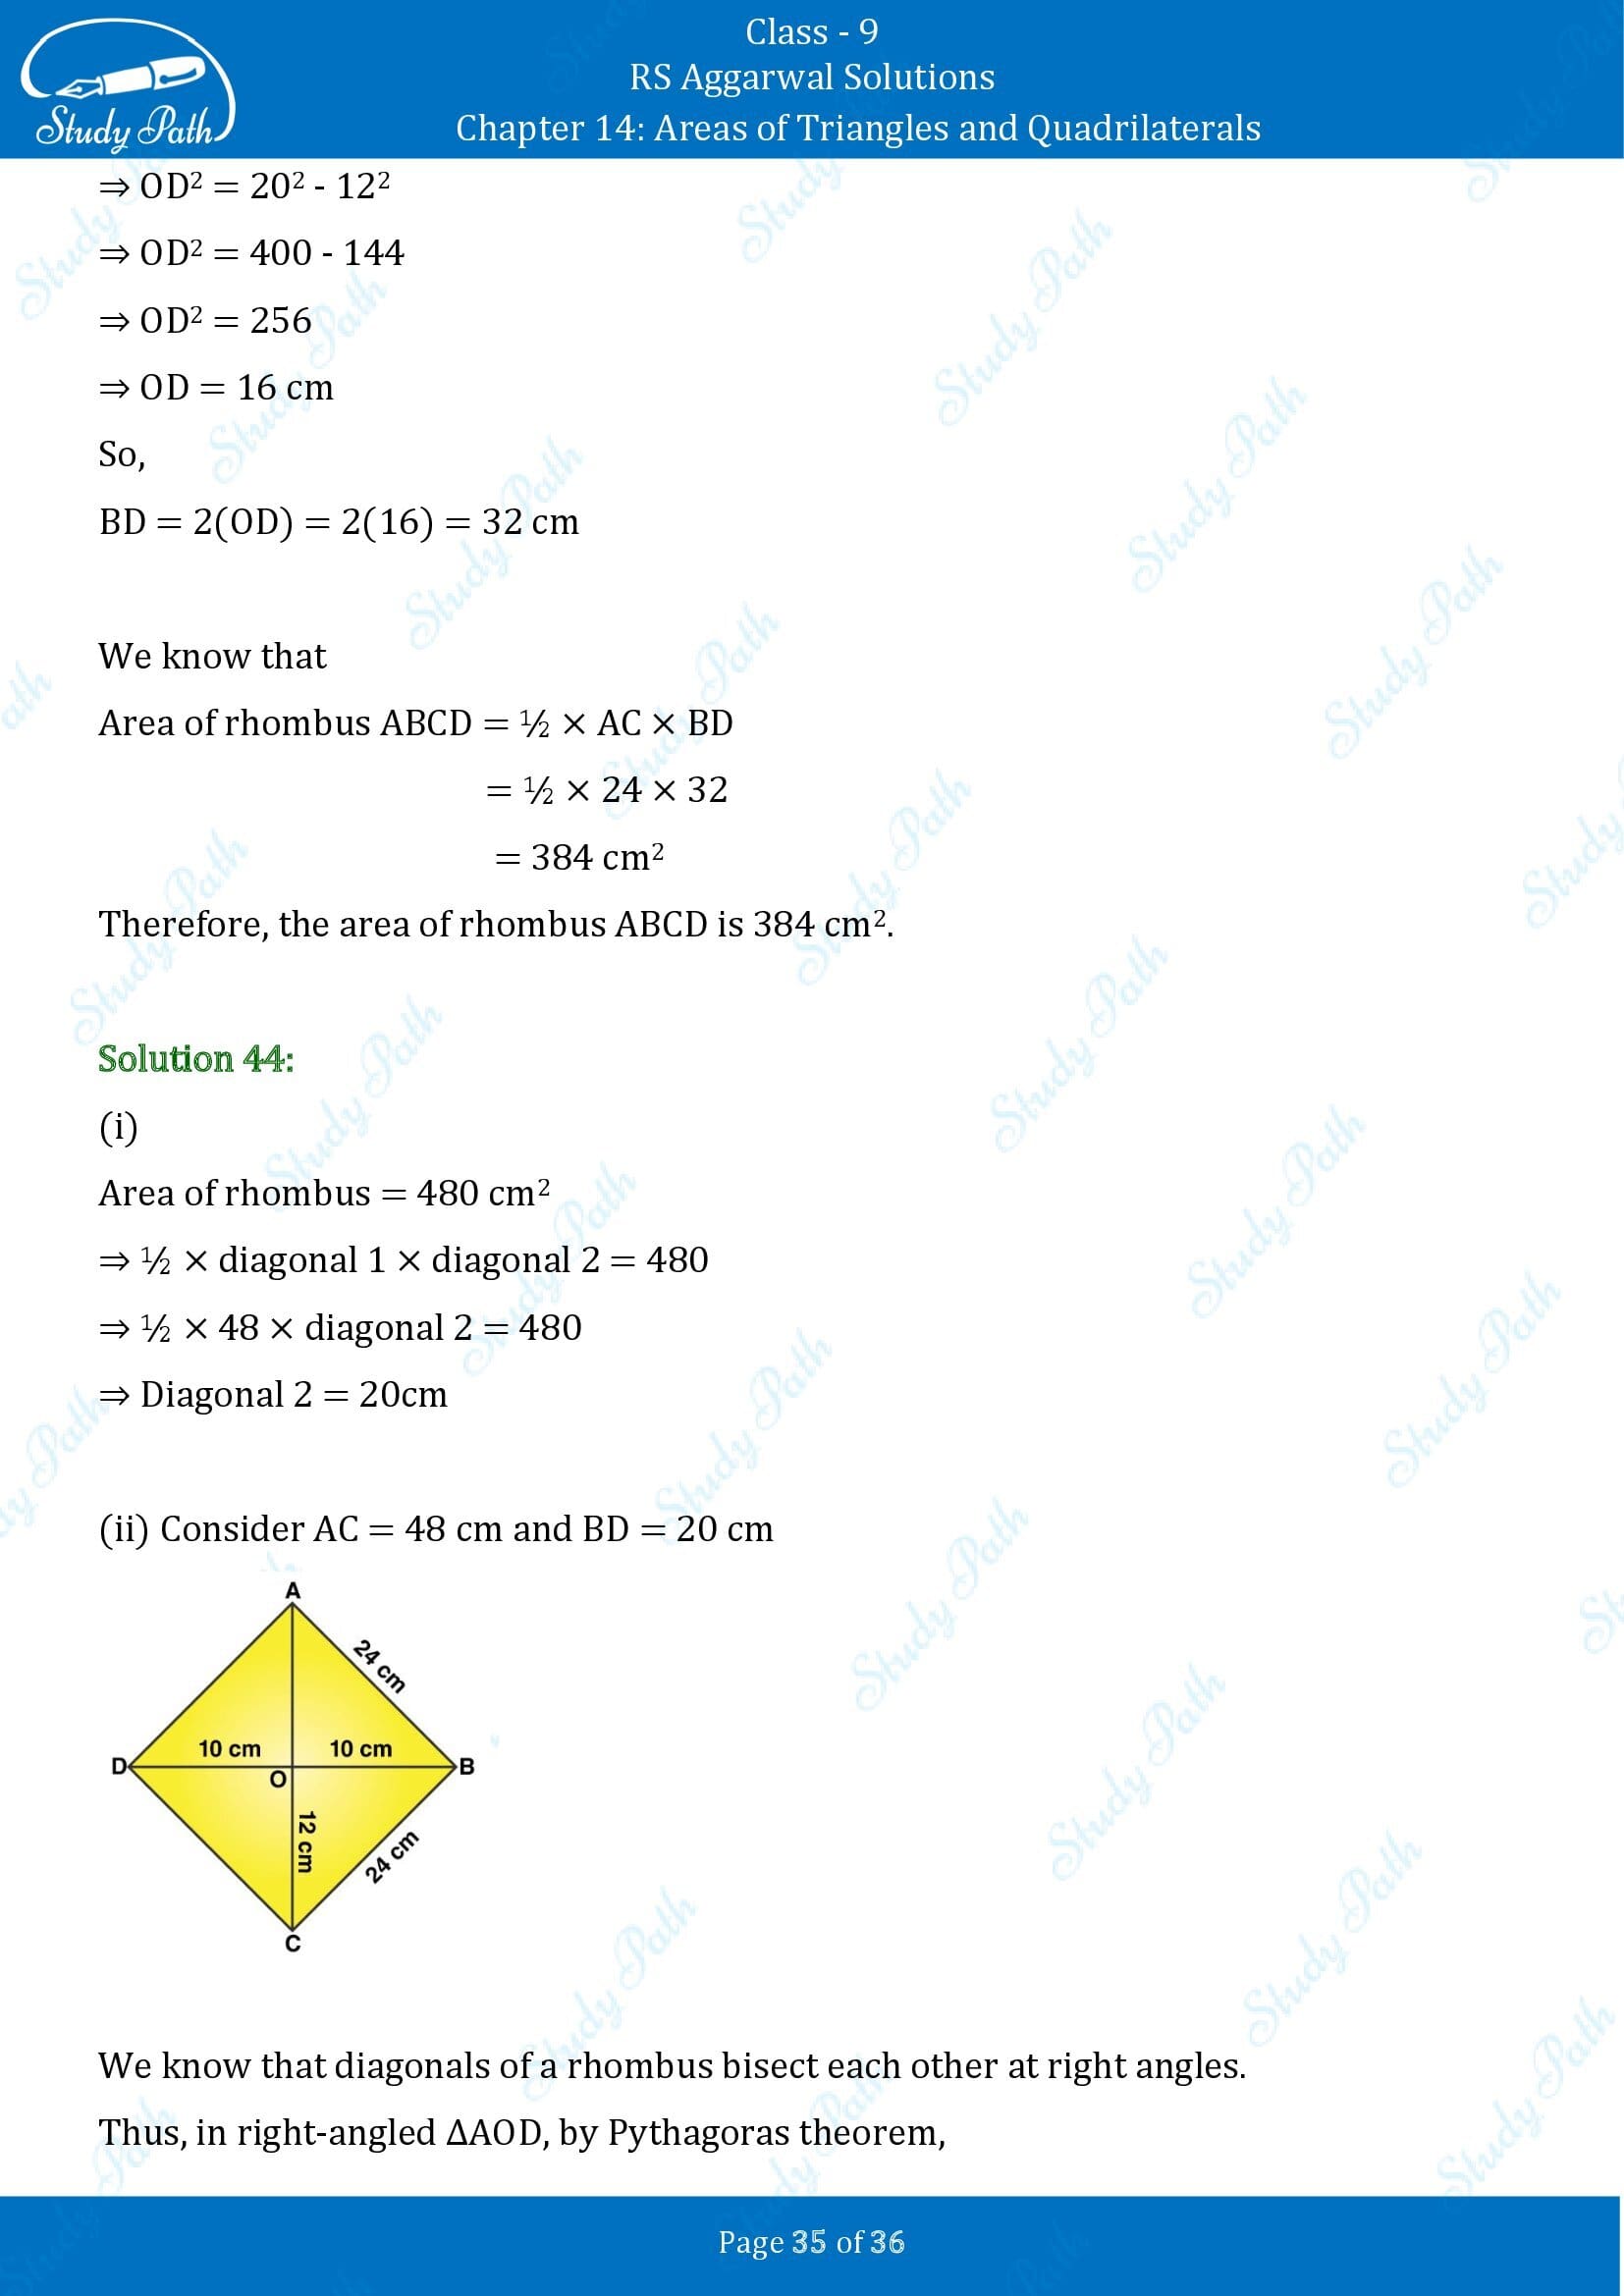 RS Aggarwal Solutions Class 9 Chapter 14 Areas of Triangles and Quadrilaterals Exercise 14 00035